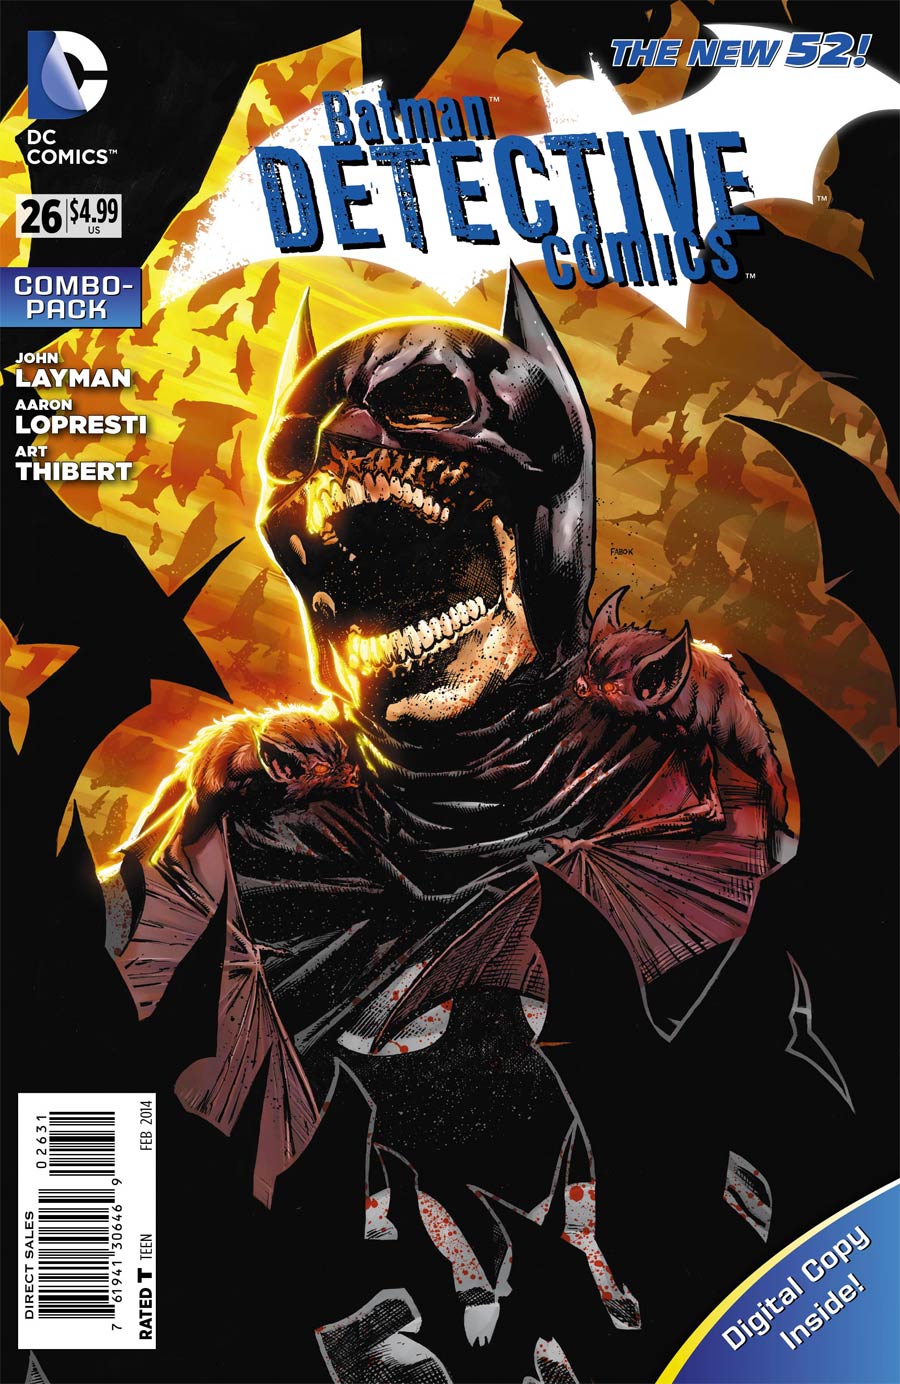 Detective Comics Vol 2 #26 Cover C Combo Pack Without Polybag